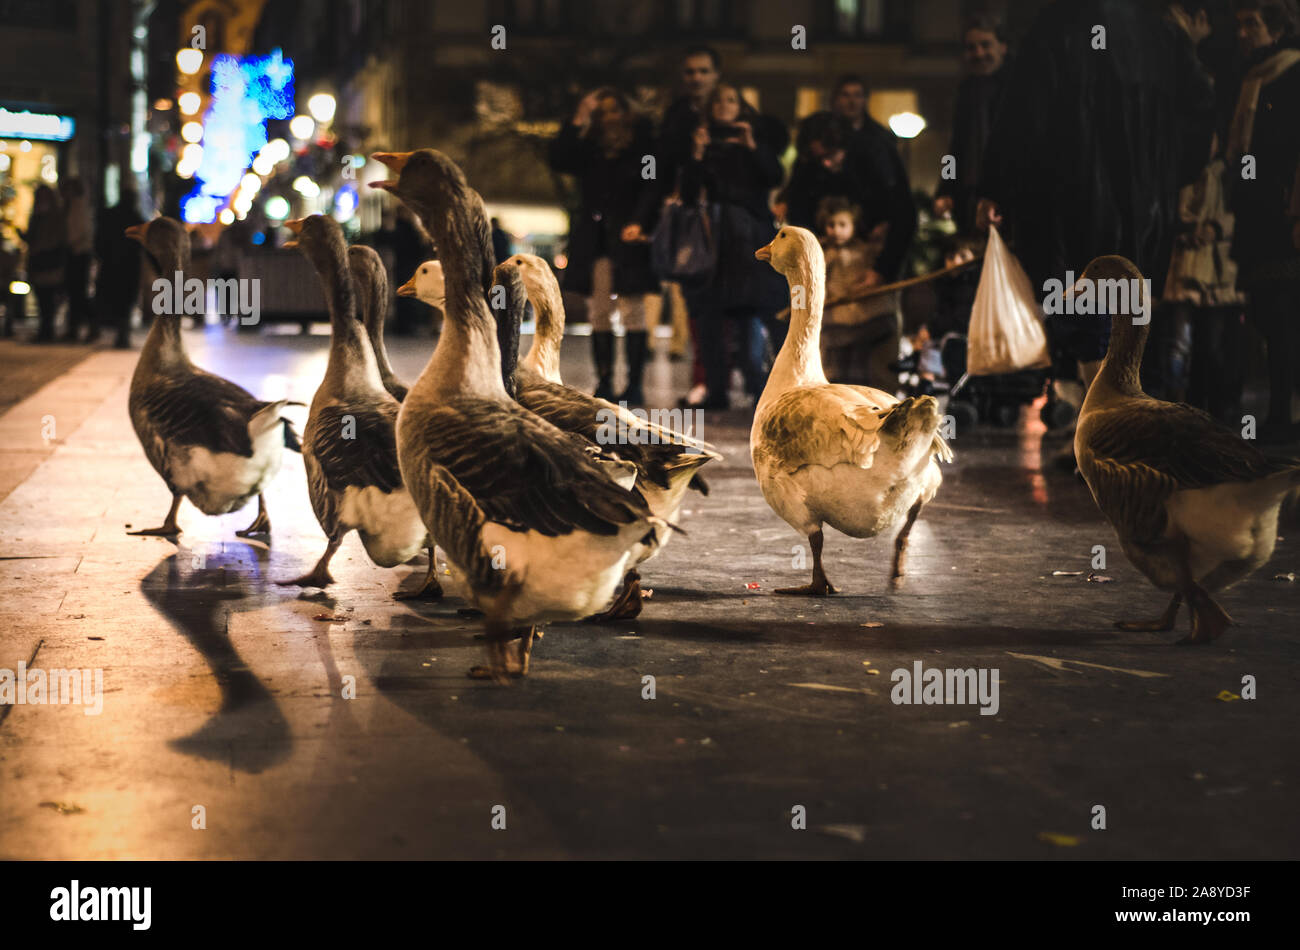 Group of geese walking down the street before the attentive gaze of the people Stock Photo